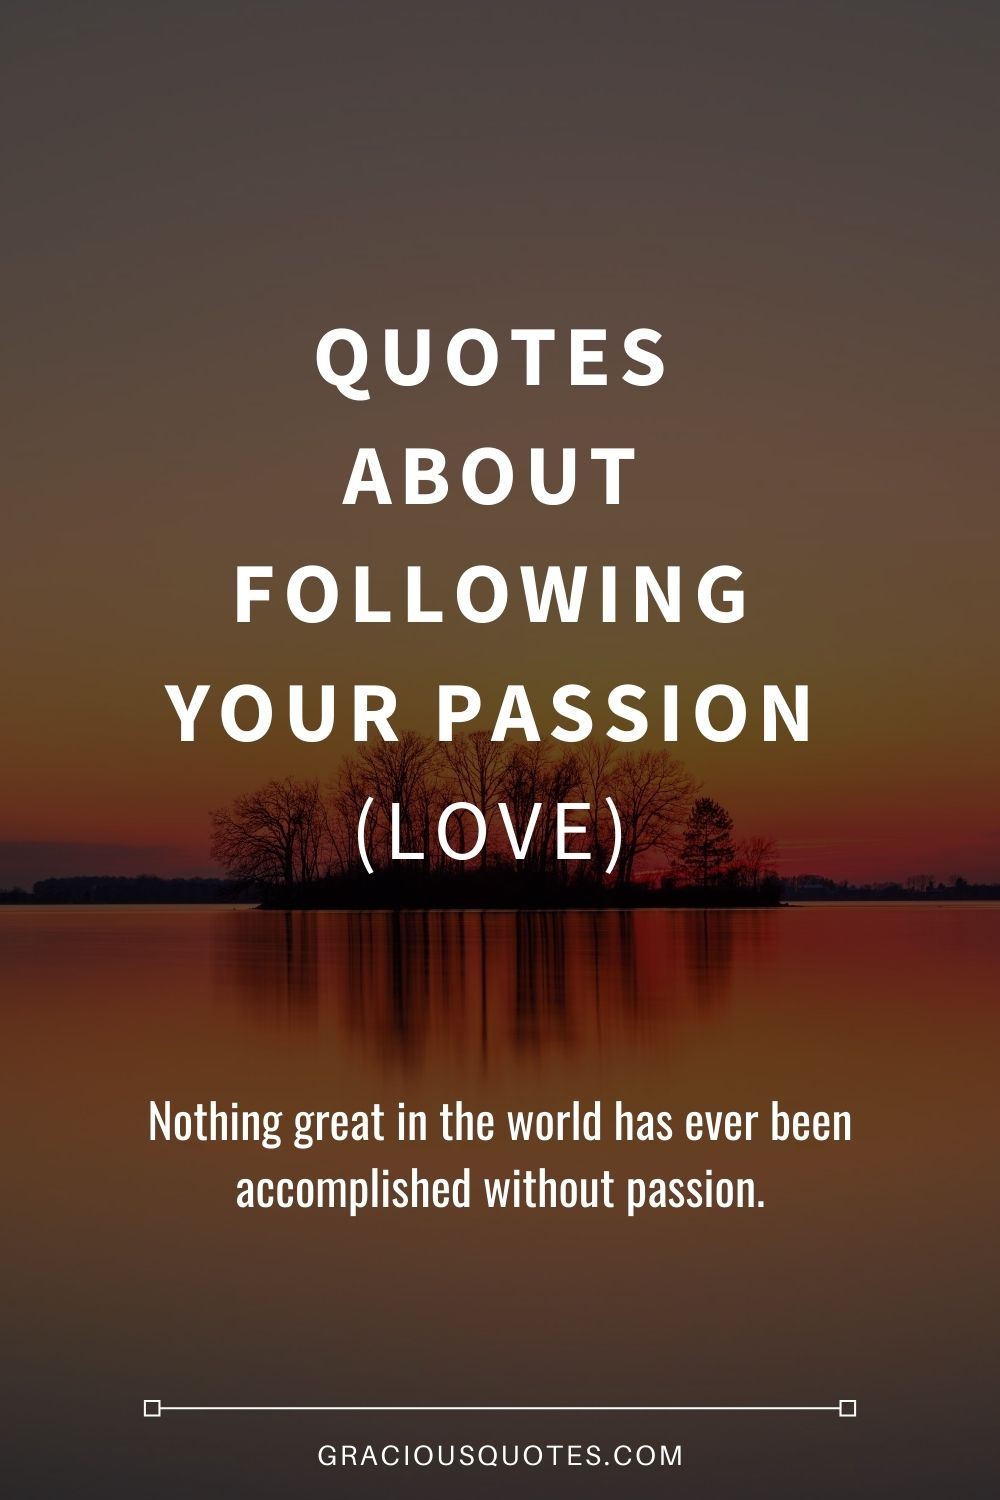 Quotes About Following Your Passion (LOVE) - Gracious Quotes